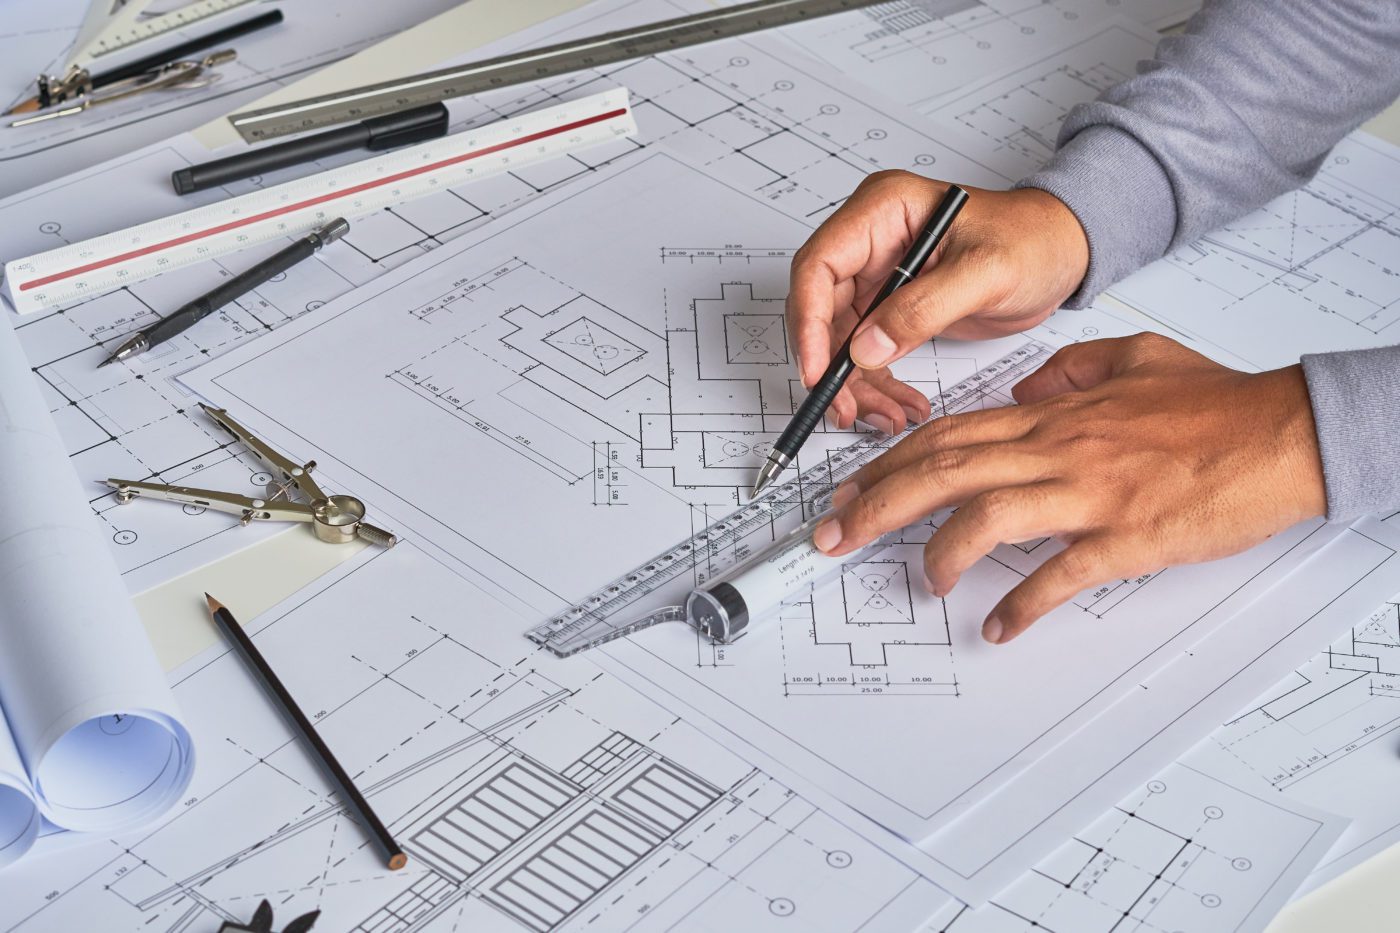 Architect,engineer,contractor,design,working,drawing,sketch,plan,blueprint,and